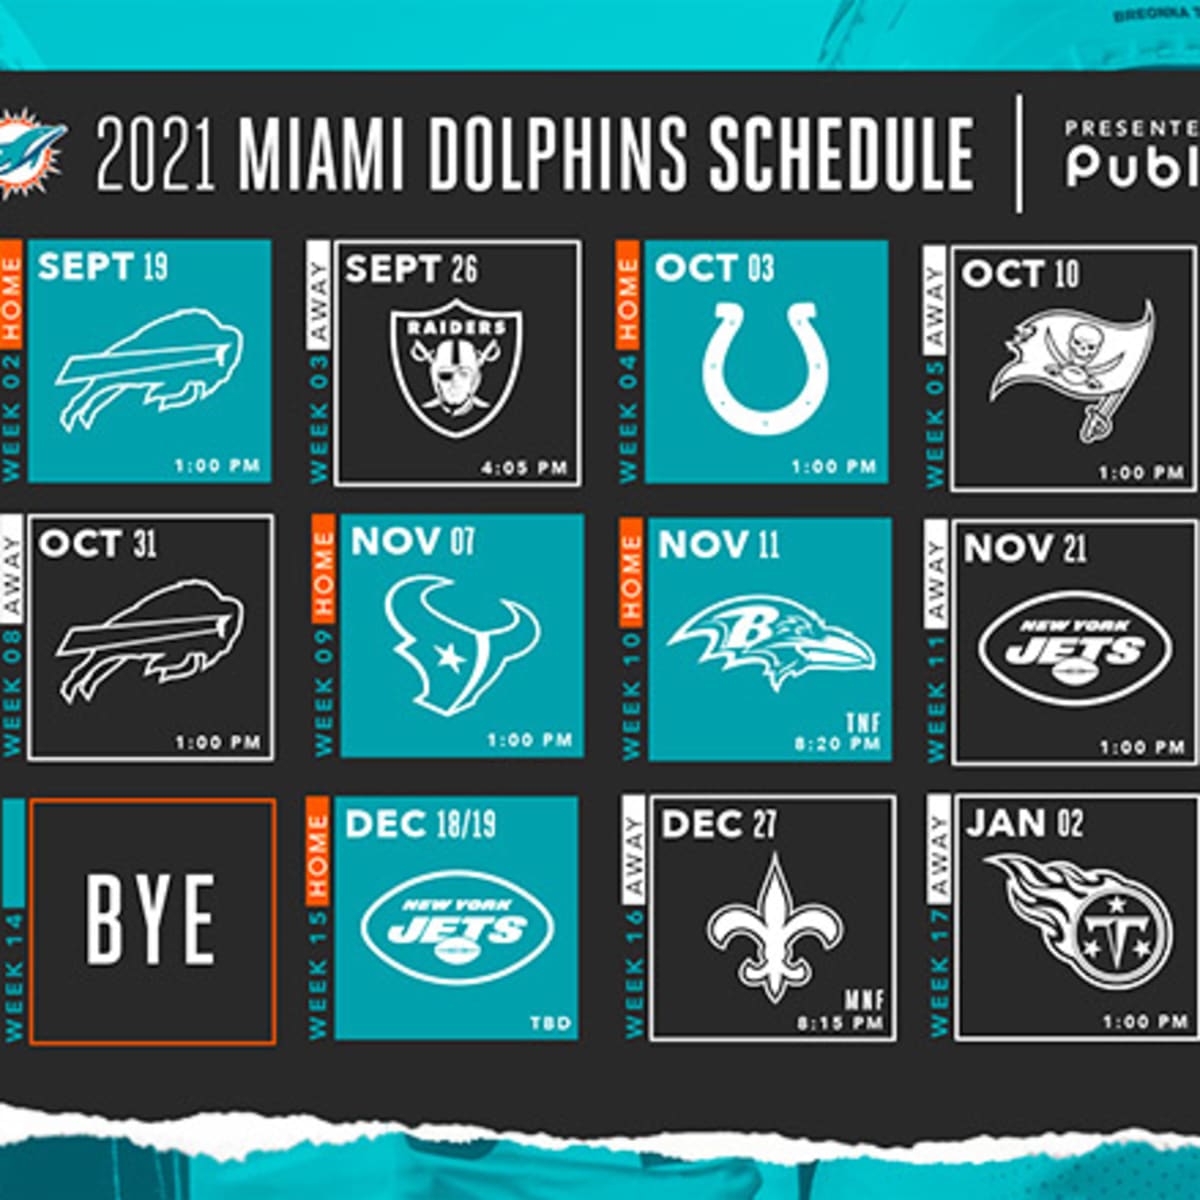 Miami Dolphins Preseason Schedule 2022 Miami Dolphins Schedule 2021 - Athlonsports.com | Expert Predictions,  Picks, And Previews